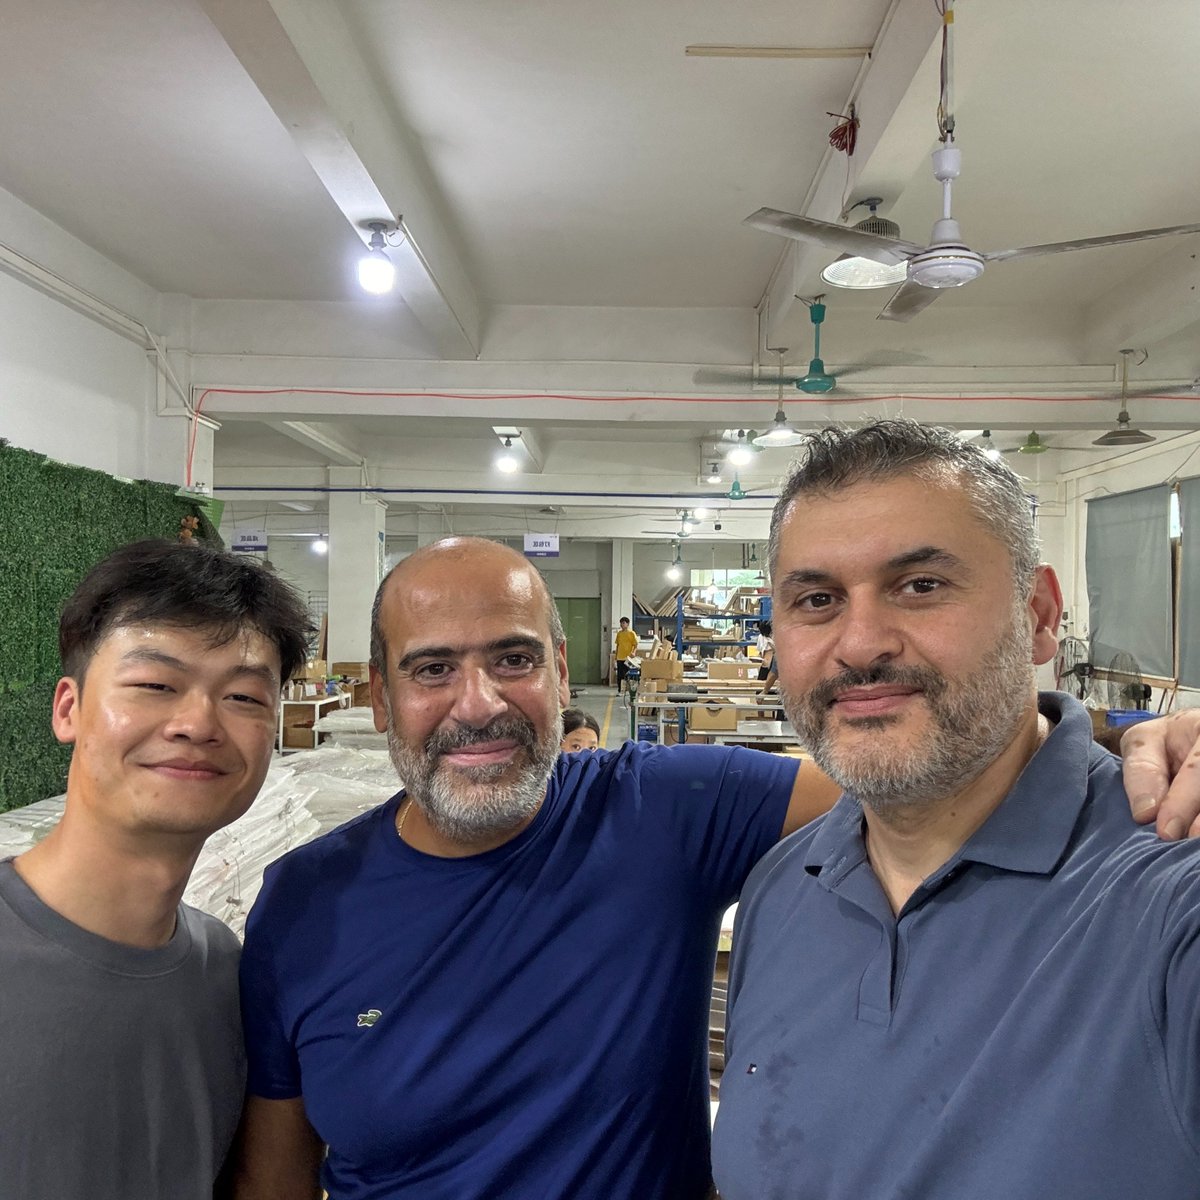 💬Welcome to visit our factory!
🤝Excited to meet our homie, Chadi!
❤️Thanks for all your support!

#welcometovisit #signage #advertising #factory #billboard #signboard #businesssigns #customsigns #foryou #tony #lcsign #aboutus